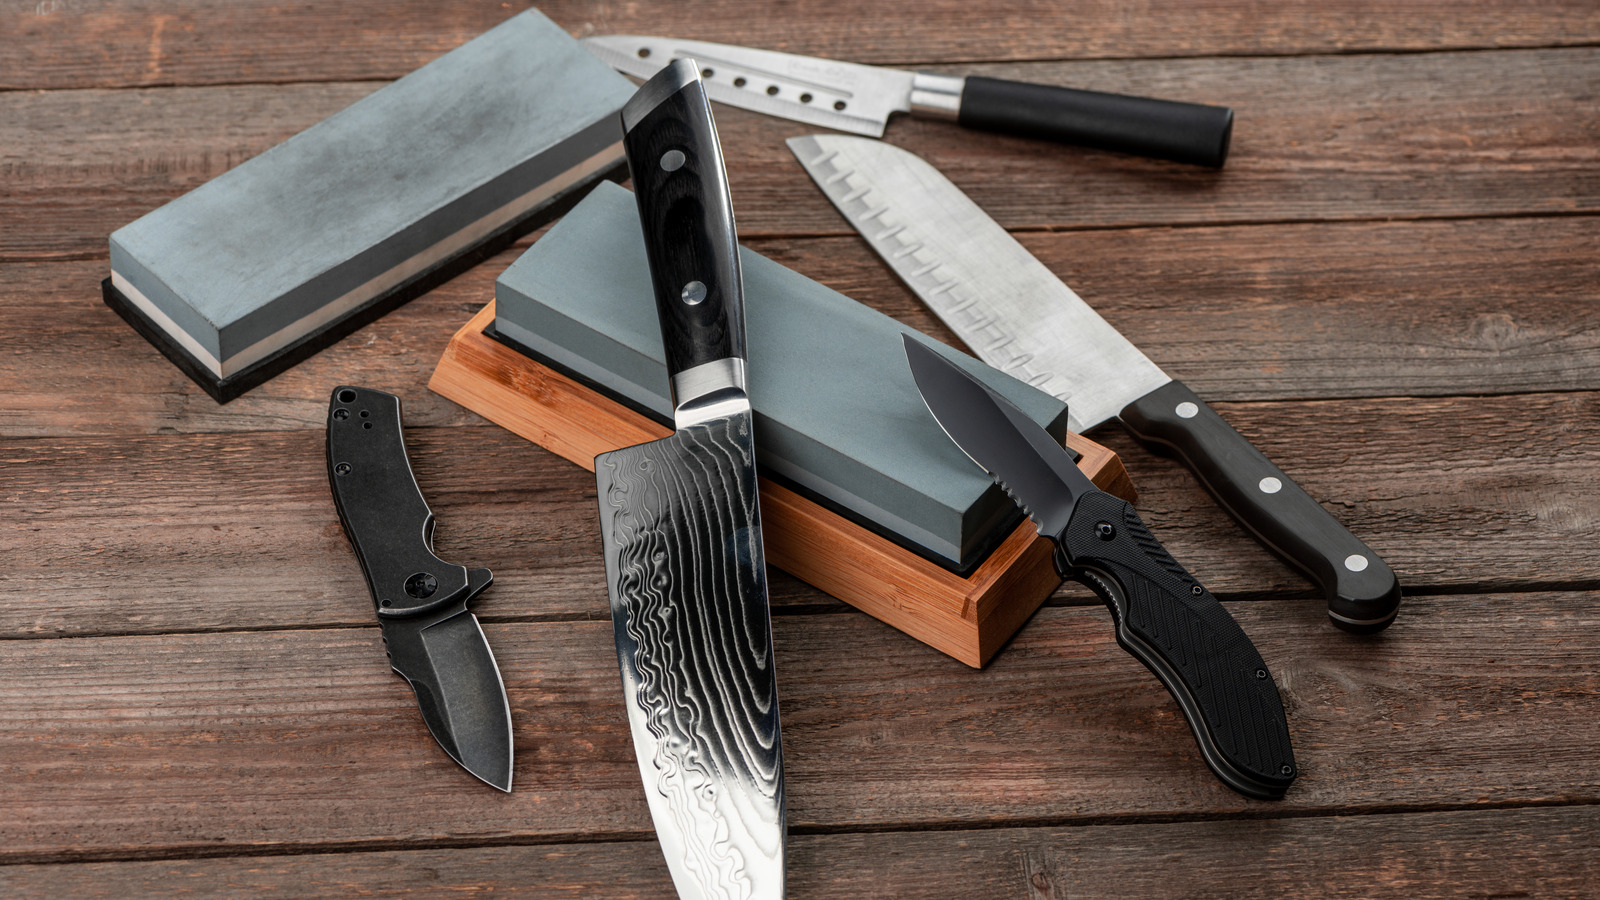 Honing vs Sharpening: What's the Difference?